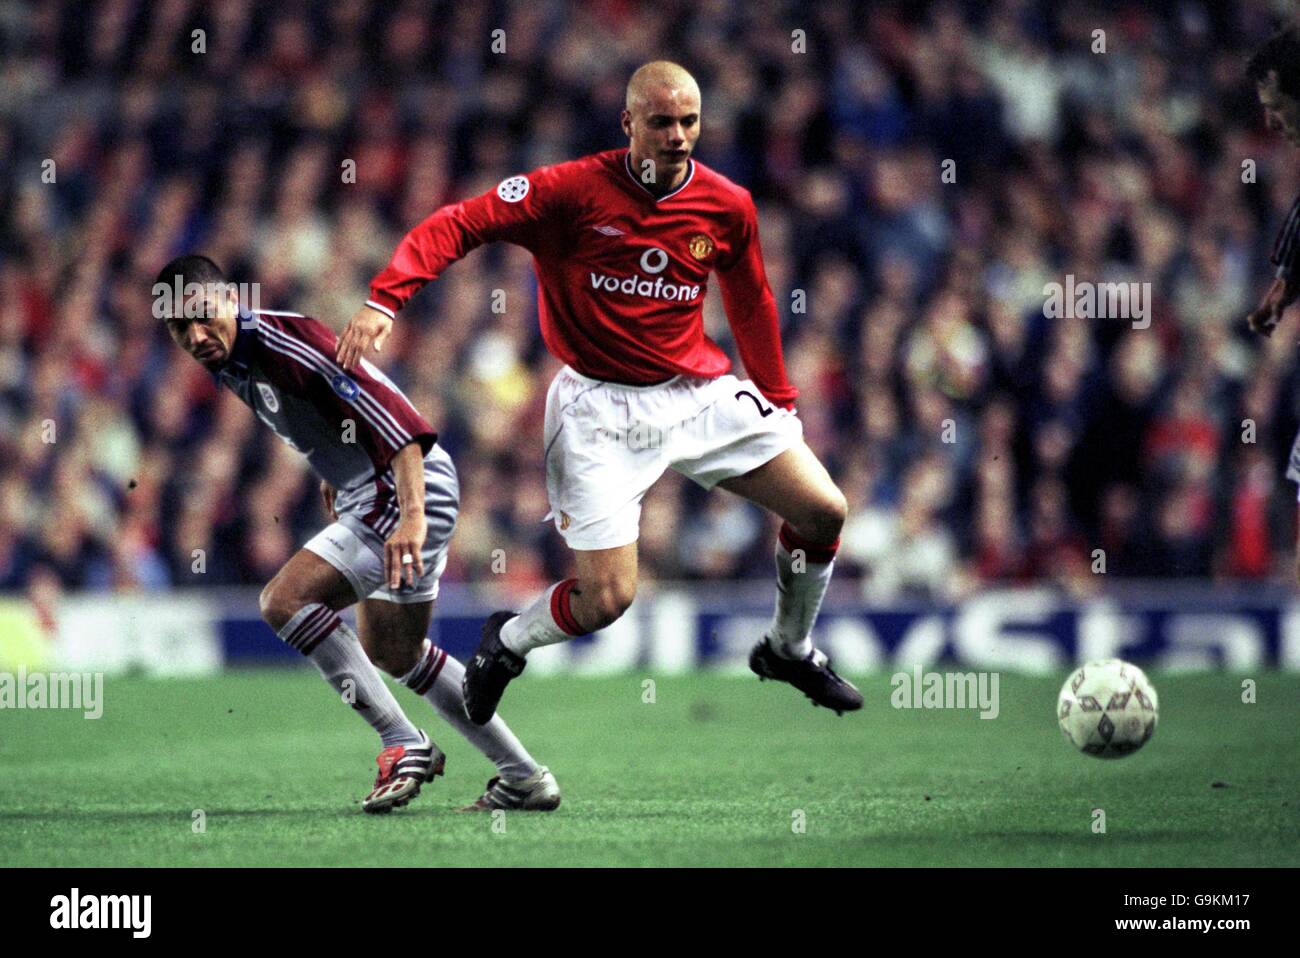 Soccer - UEFA Champions League - Quarter Final First Leg - Manchester United v Bayern Munich. Manchester United's Wes Brown (r) gets away from Giovane Elber of Bayern Munich (l) Stock Photo